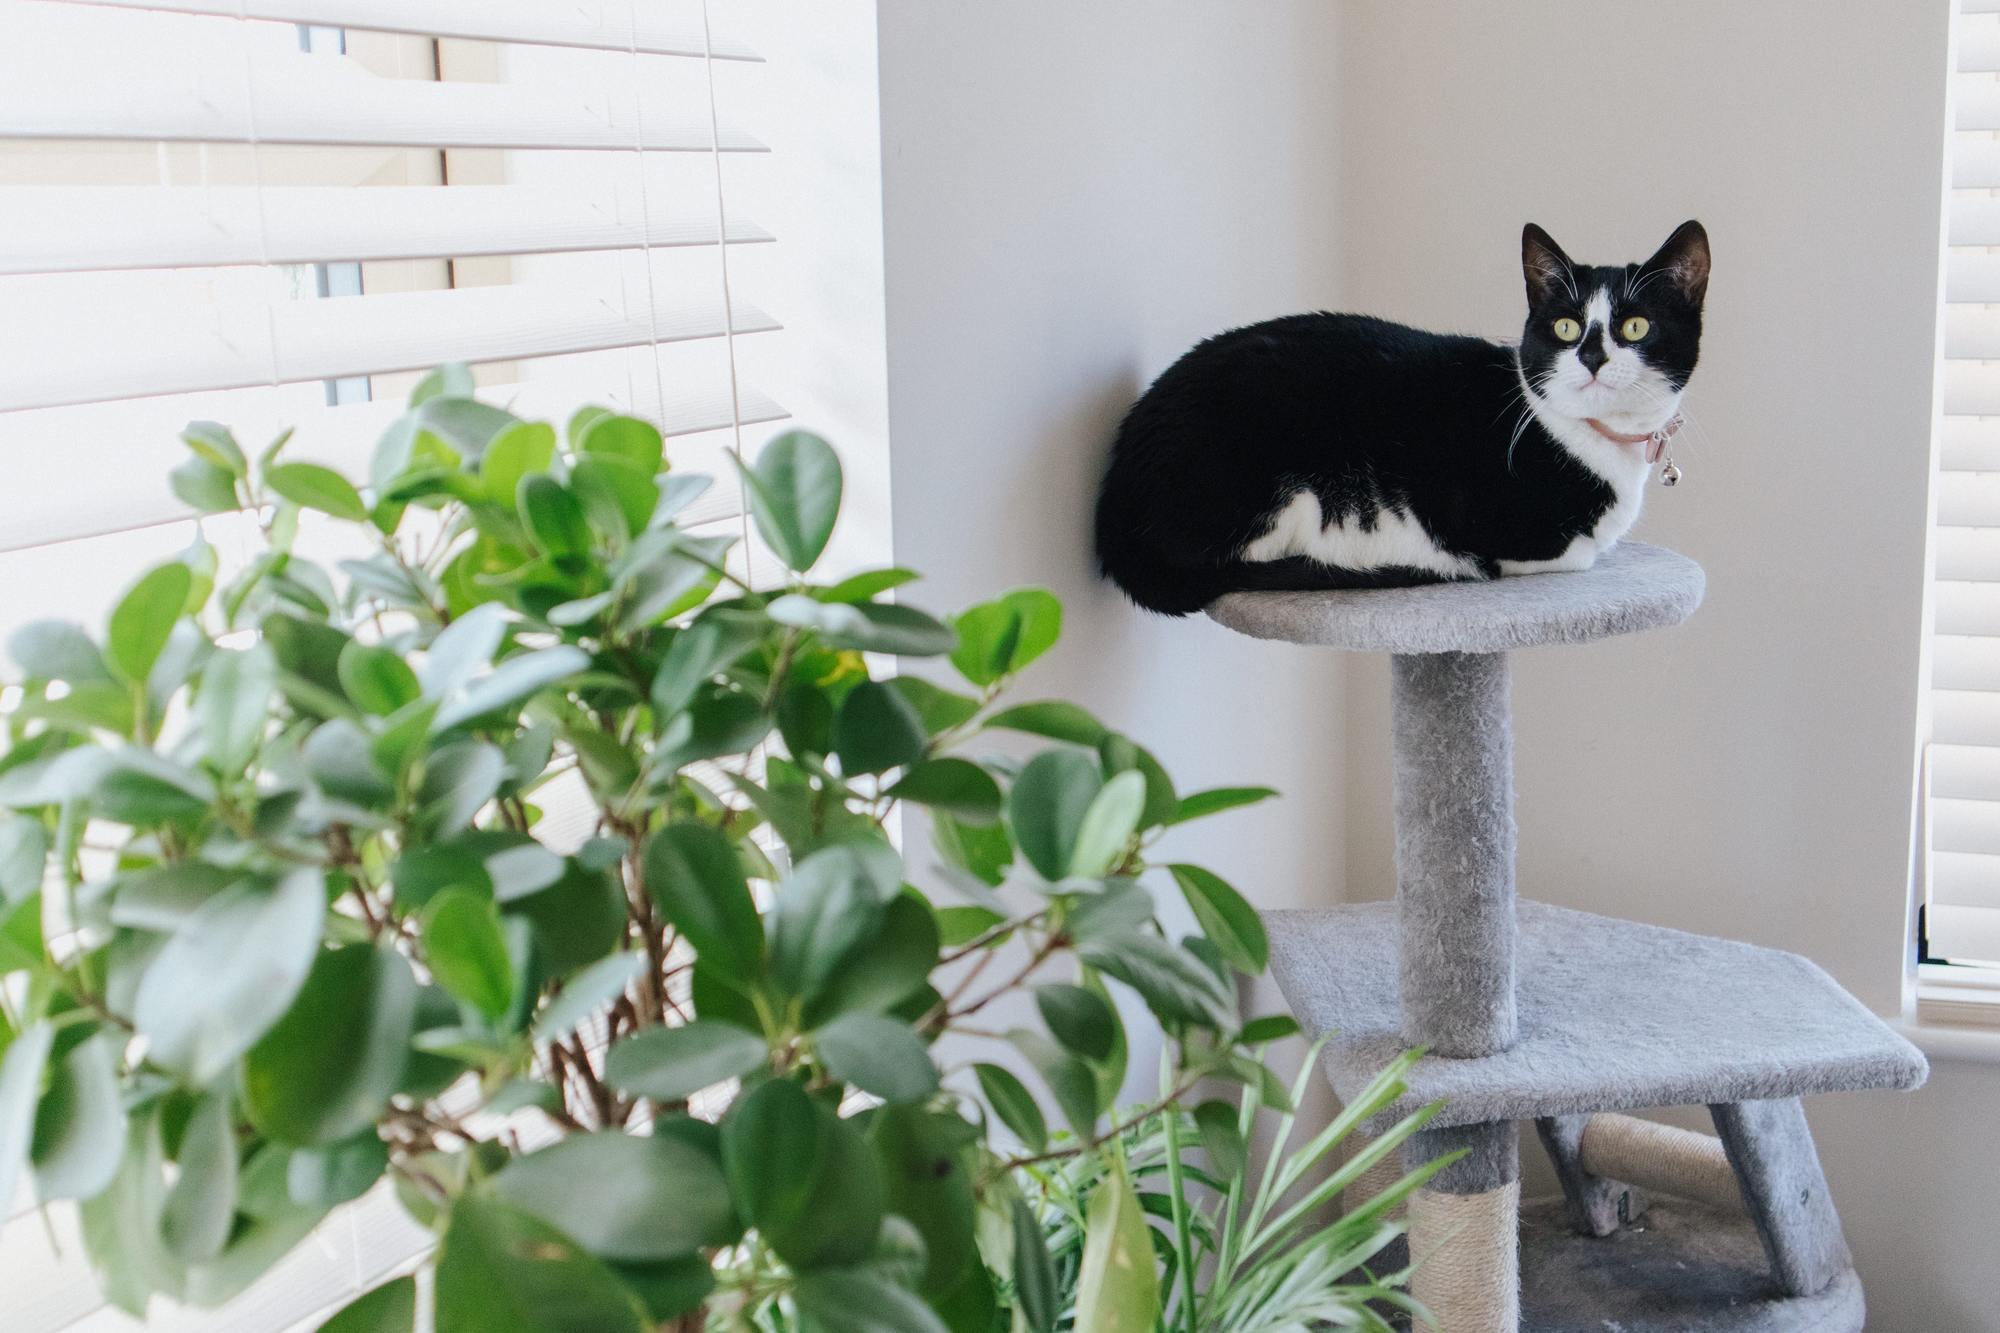 Black and white cat sat on cat scratcher and a green plant